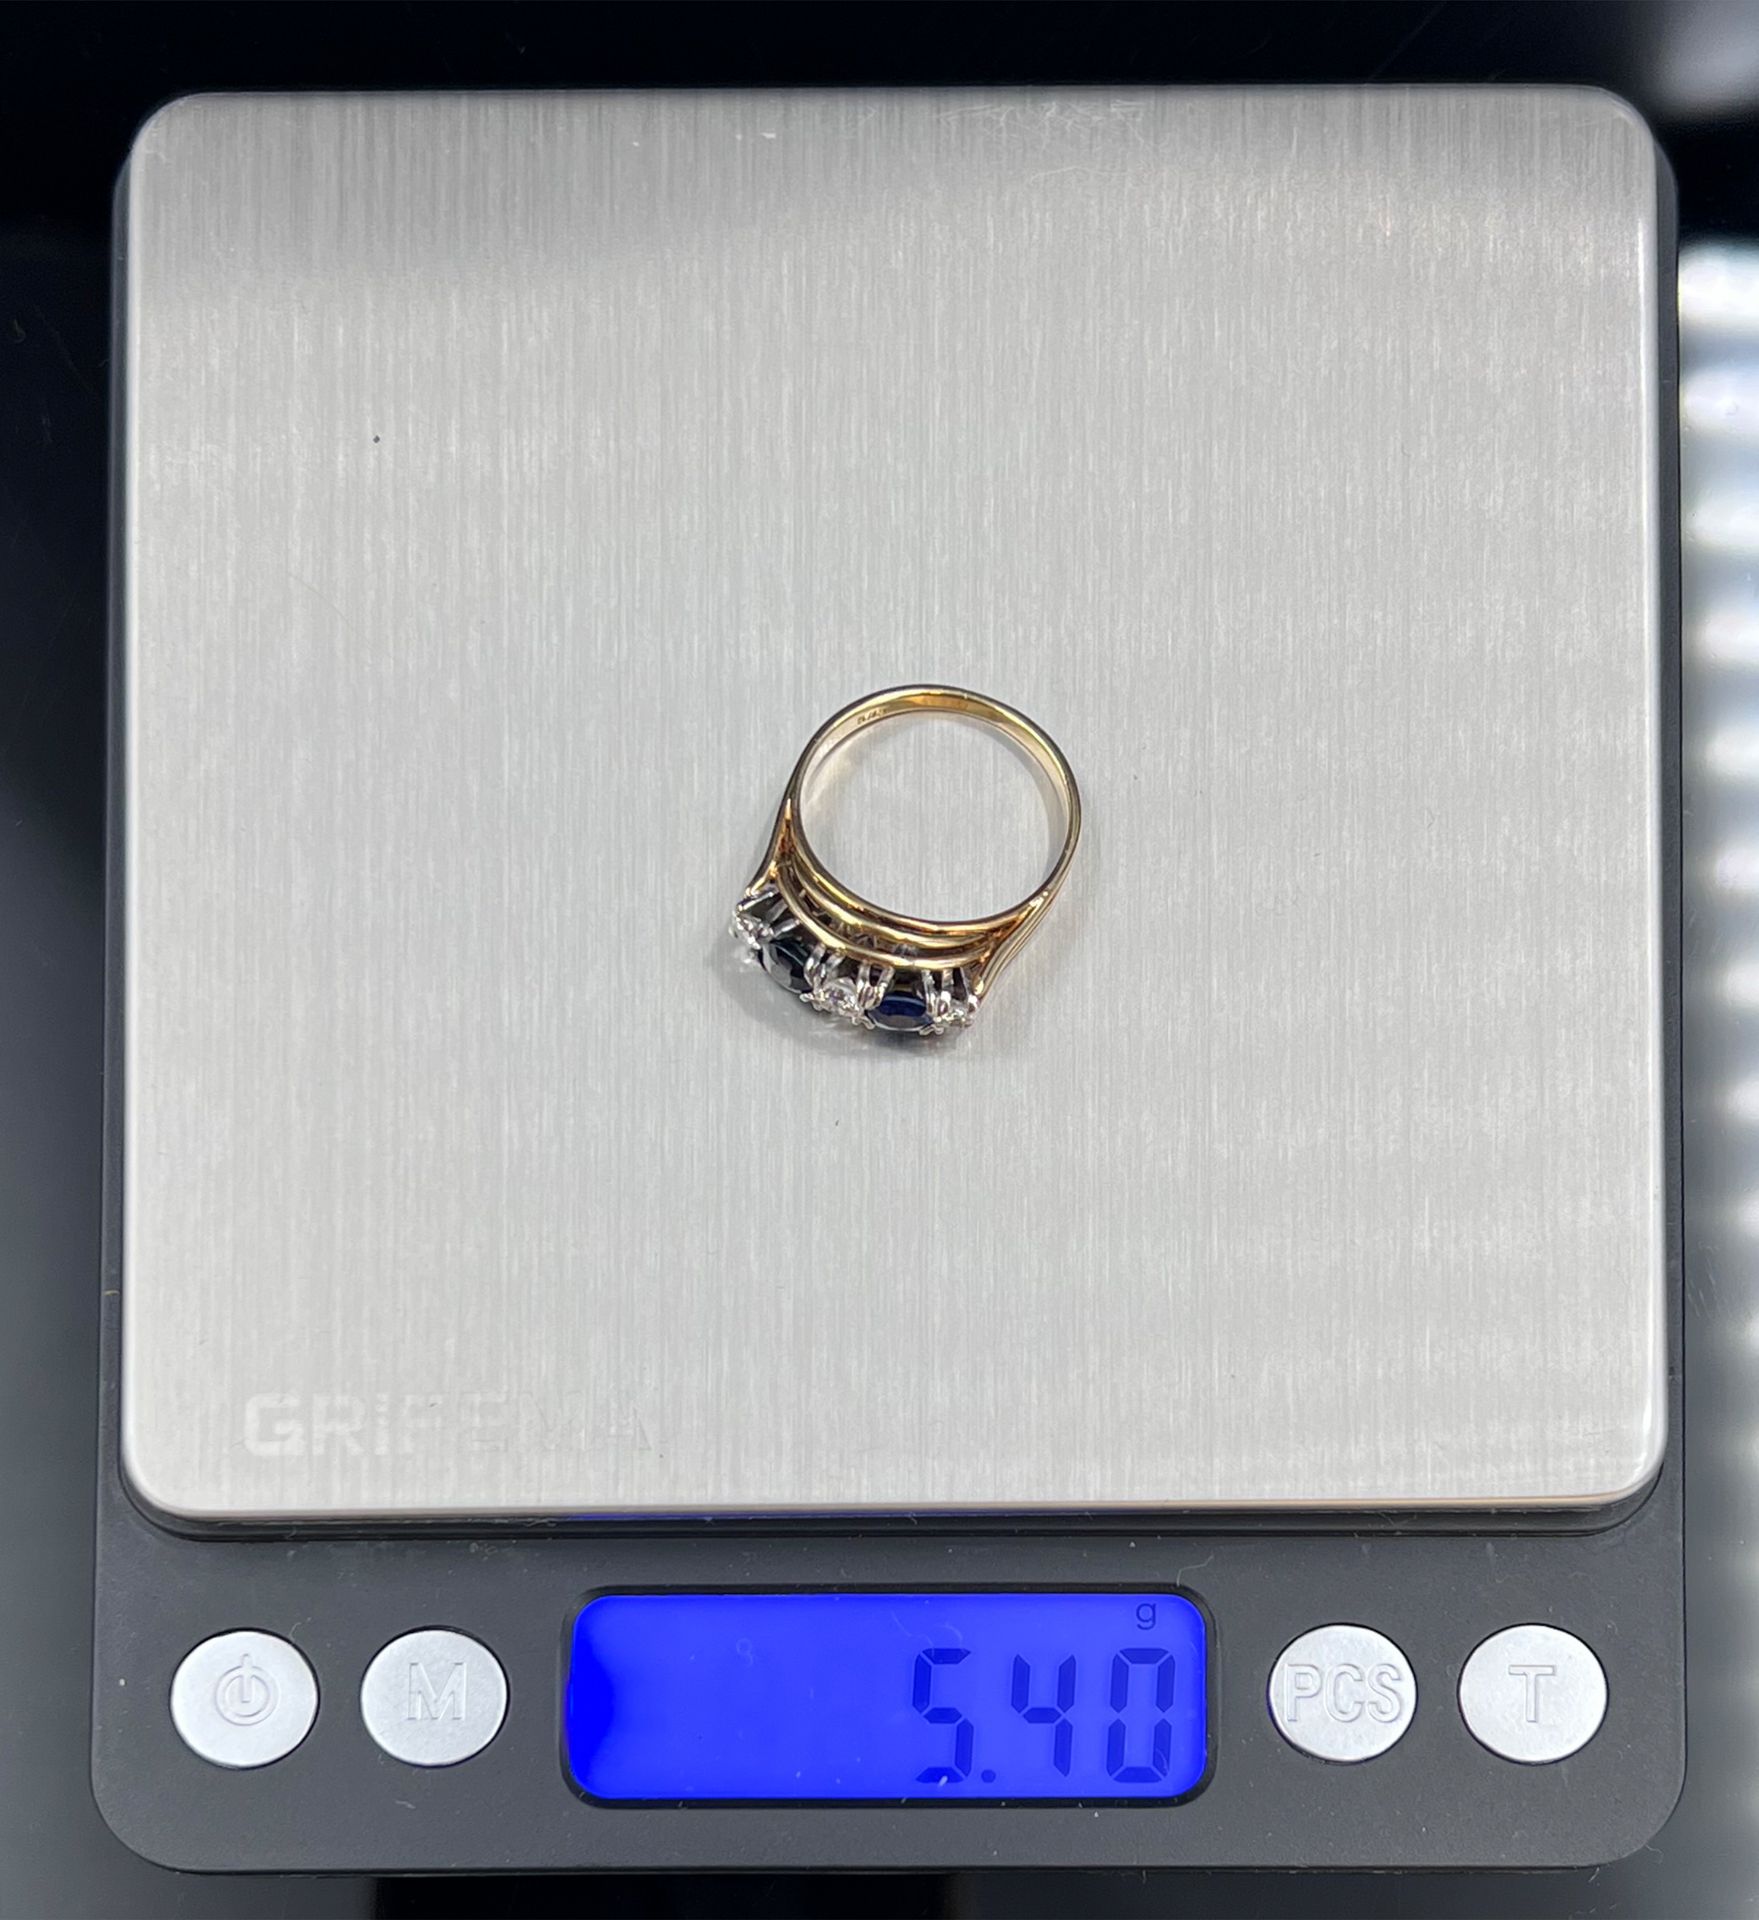 Ladies' ring. 585 yellow gold and white gold with 3 diamonds and 2 sapphires. - Image 8 of 8